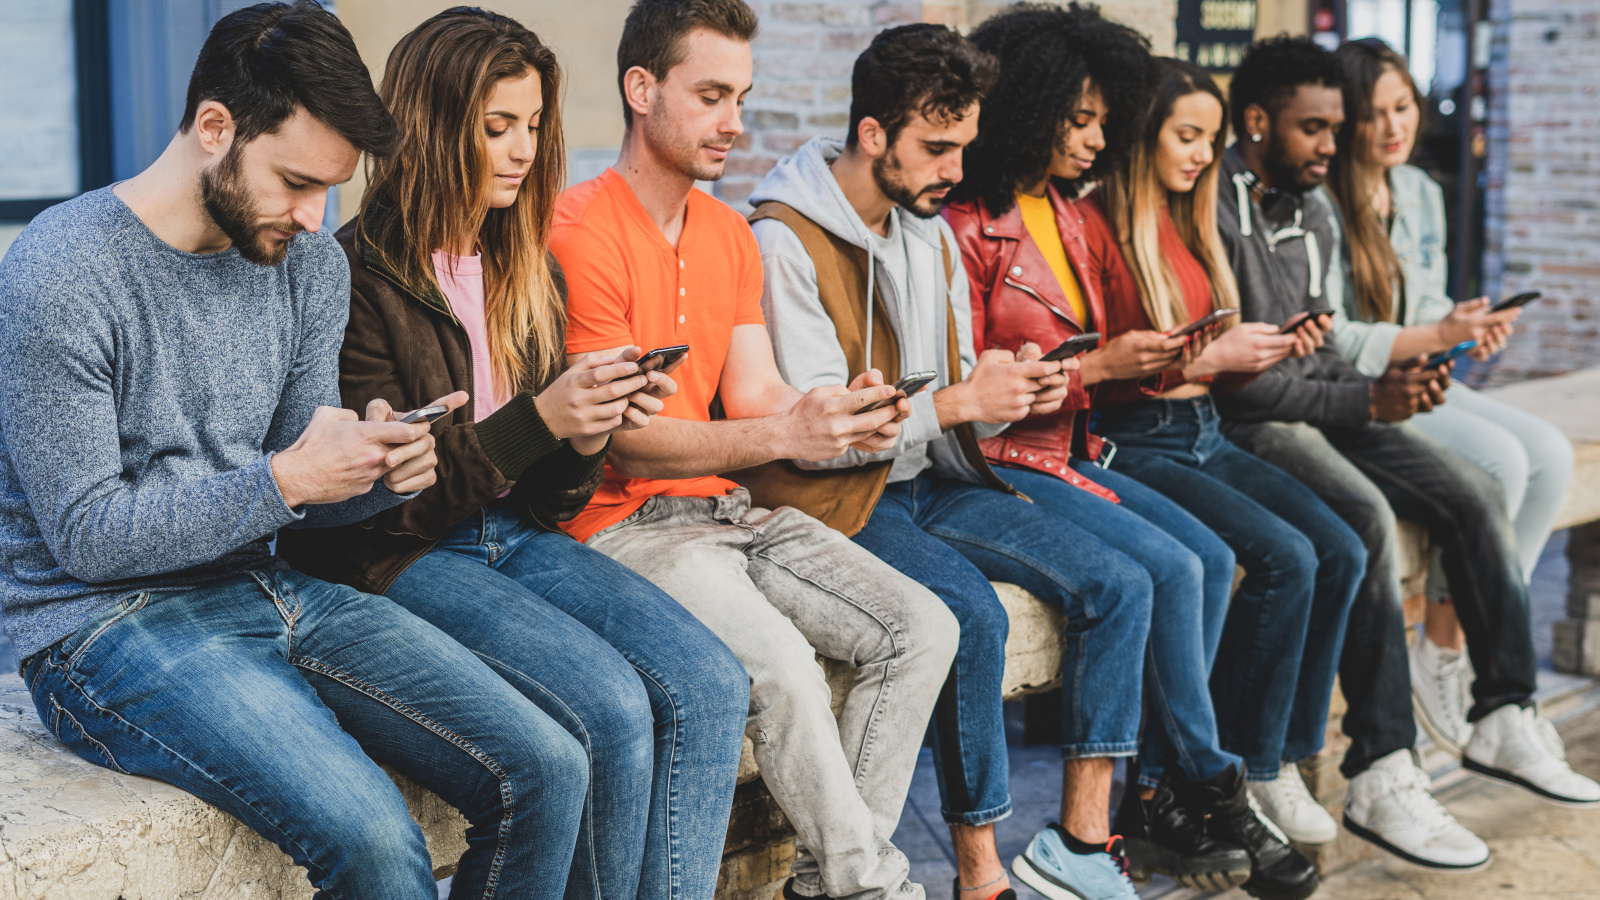 Group of young people looking at their phones